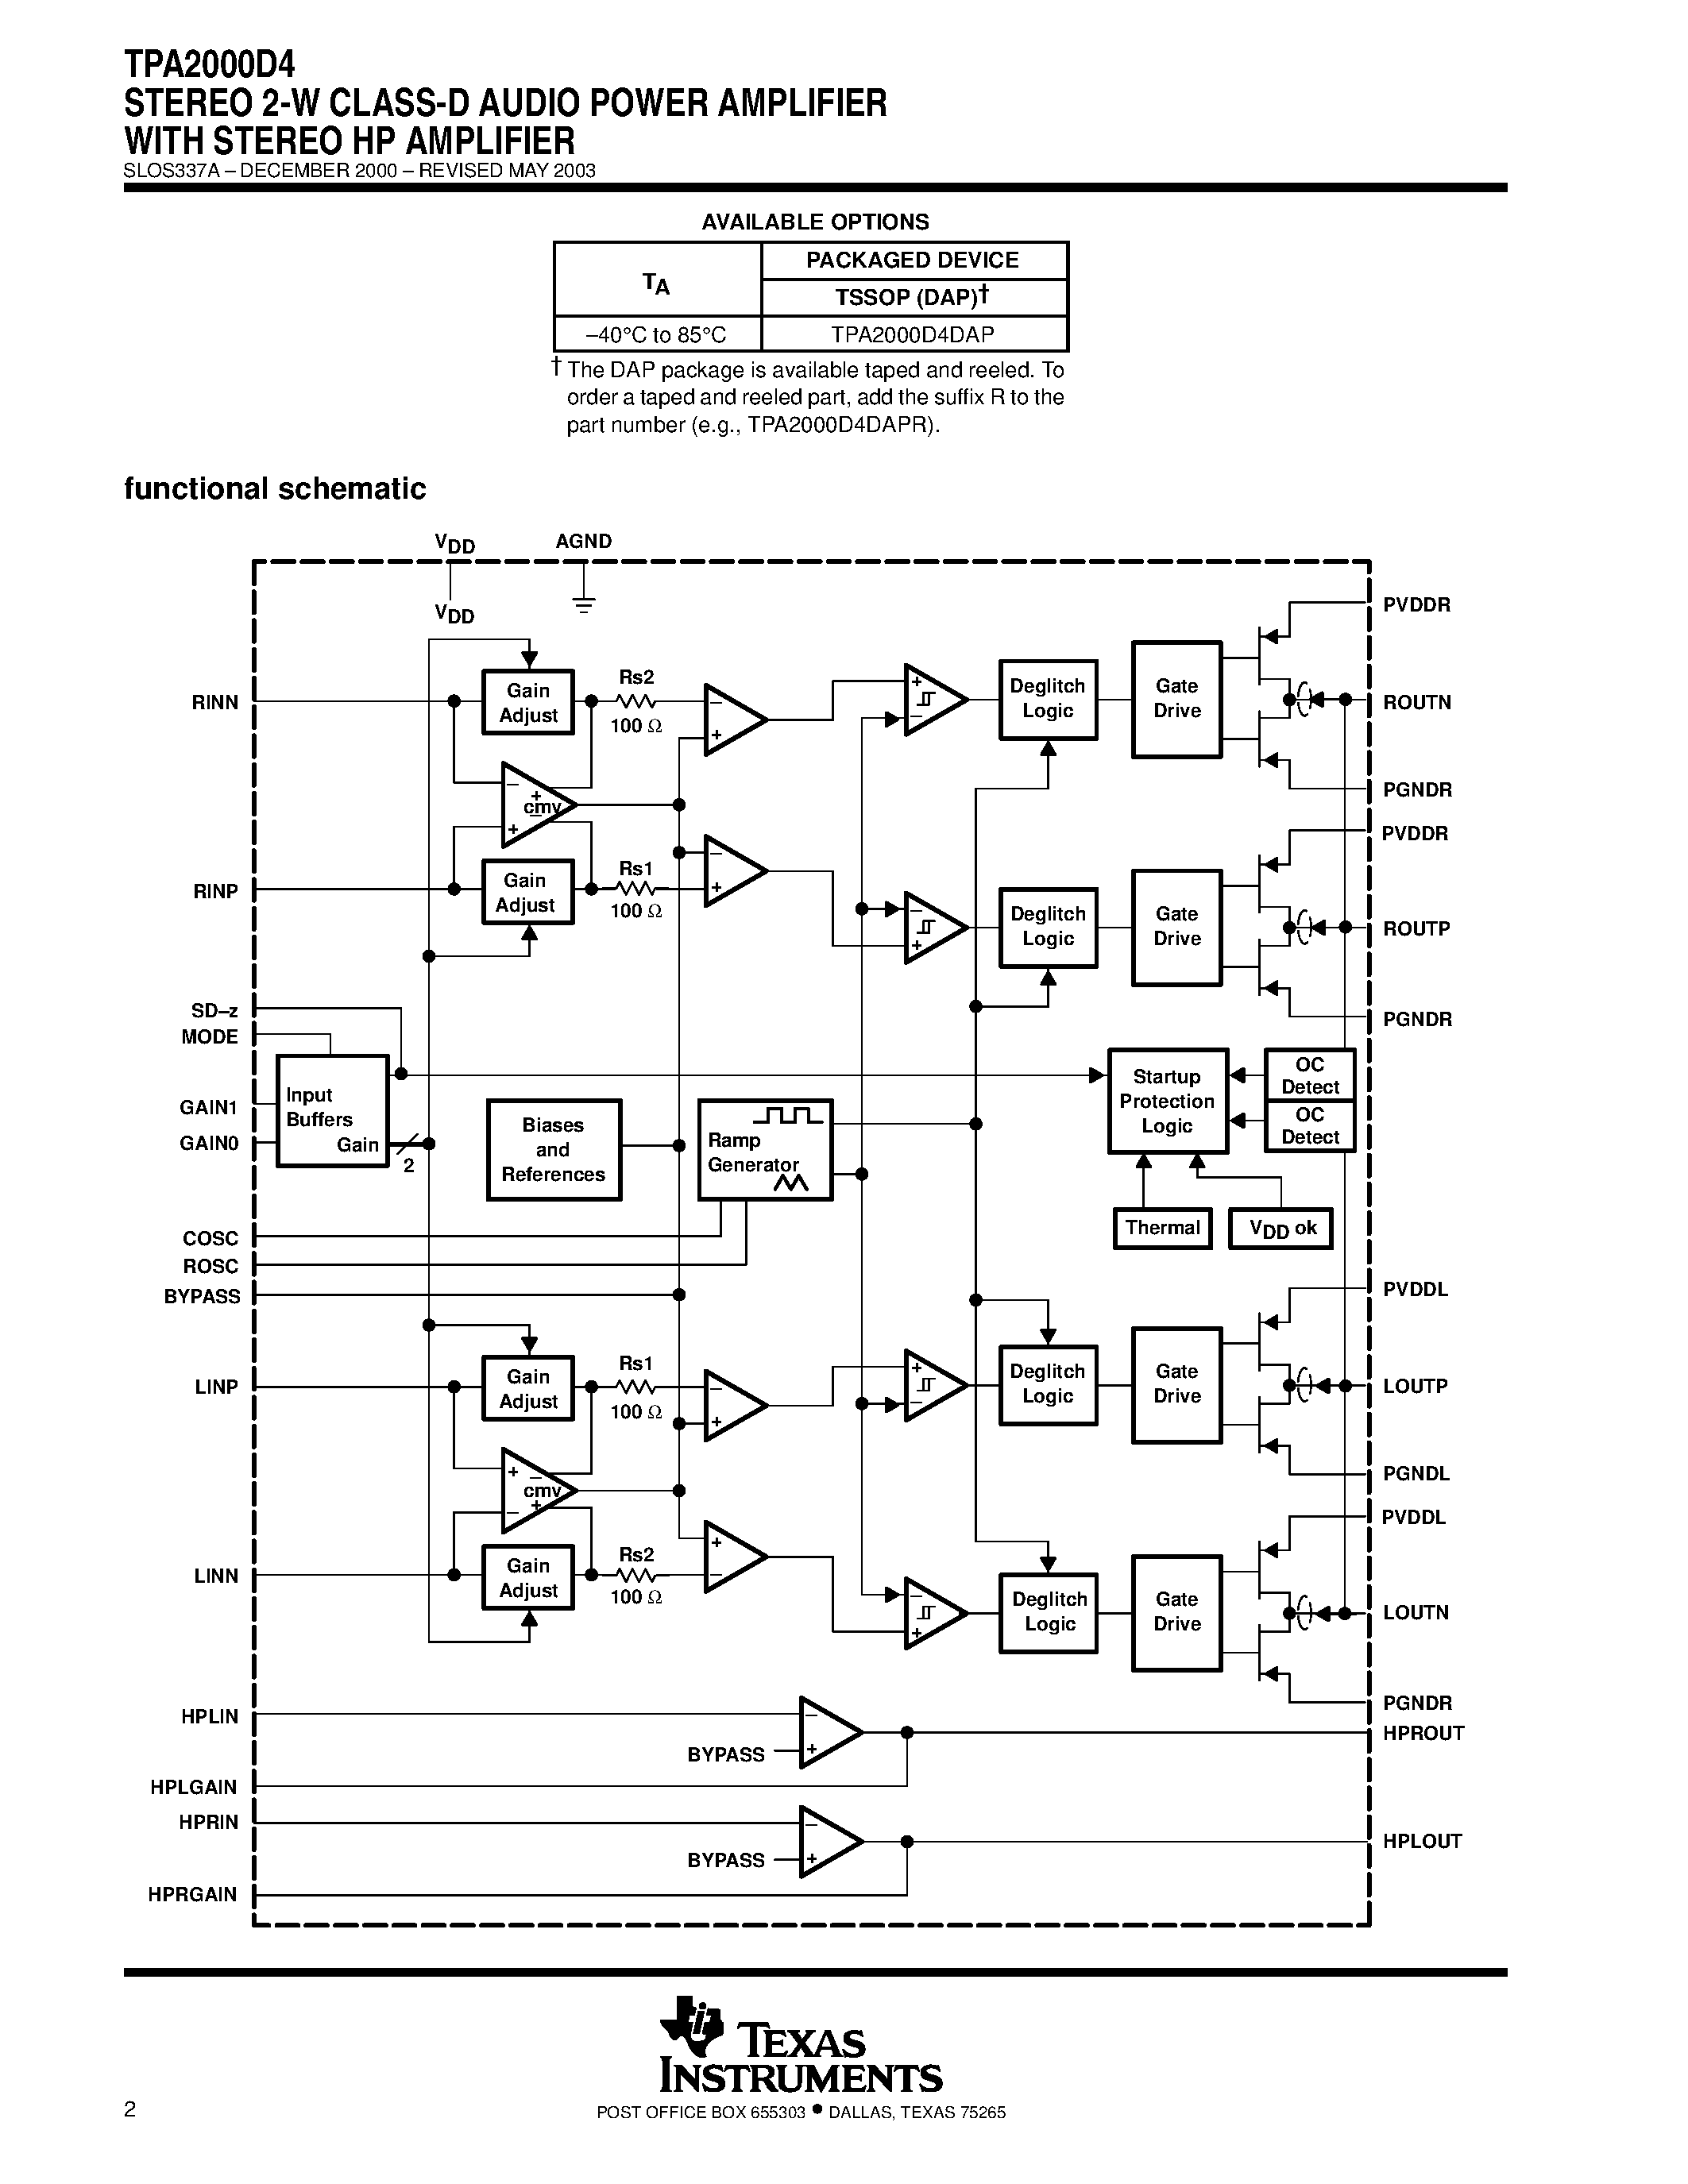 Datasheet TPA2000D4 - STEREO 2-W CLASS-D AUDIO POWER AMPLIFIER WITH STEREO HP AMPLIFIER page 2